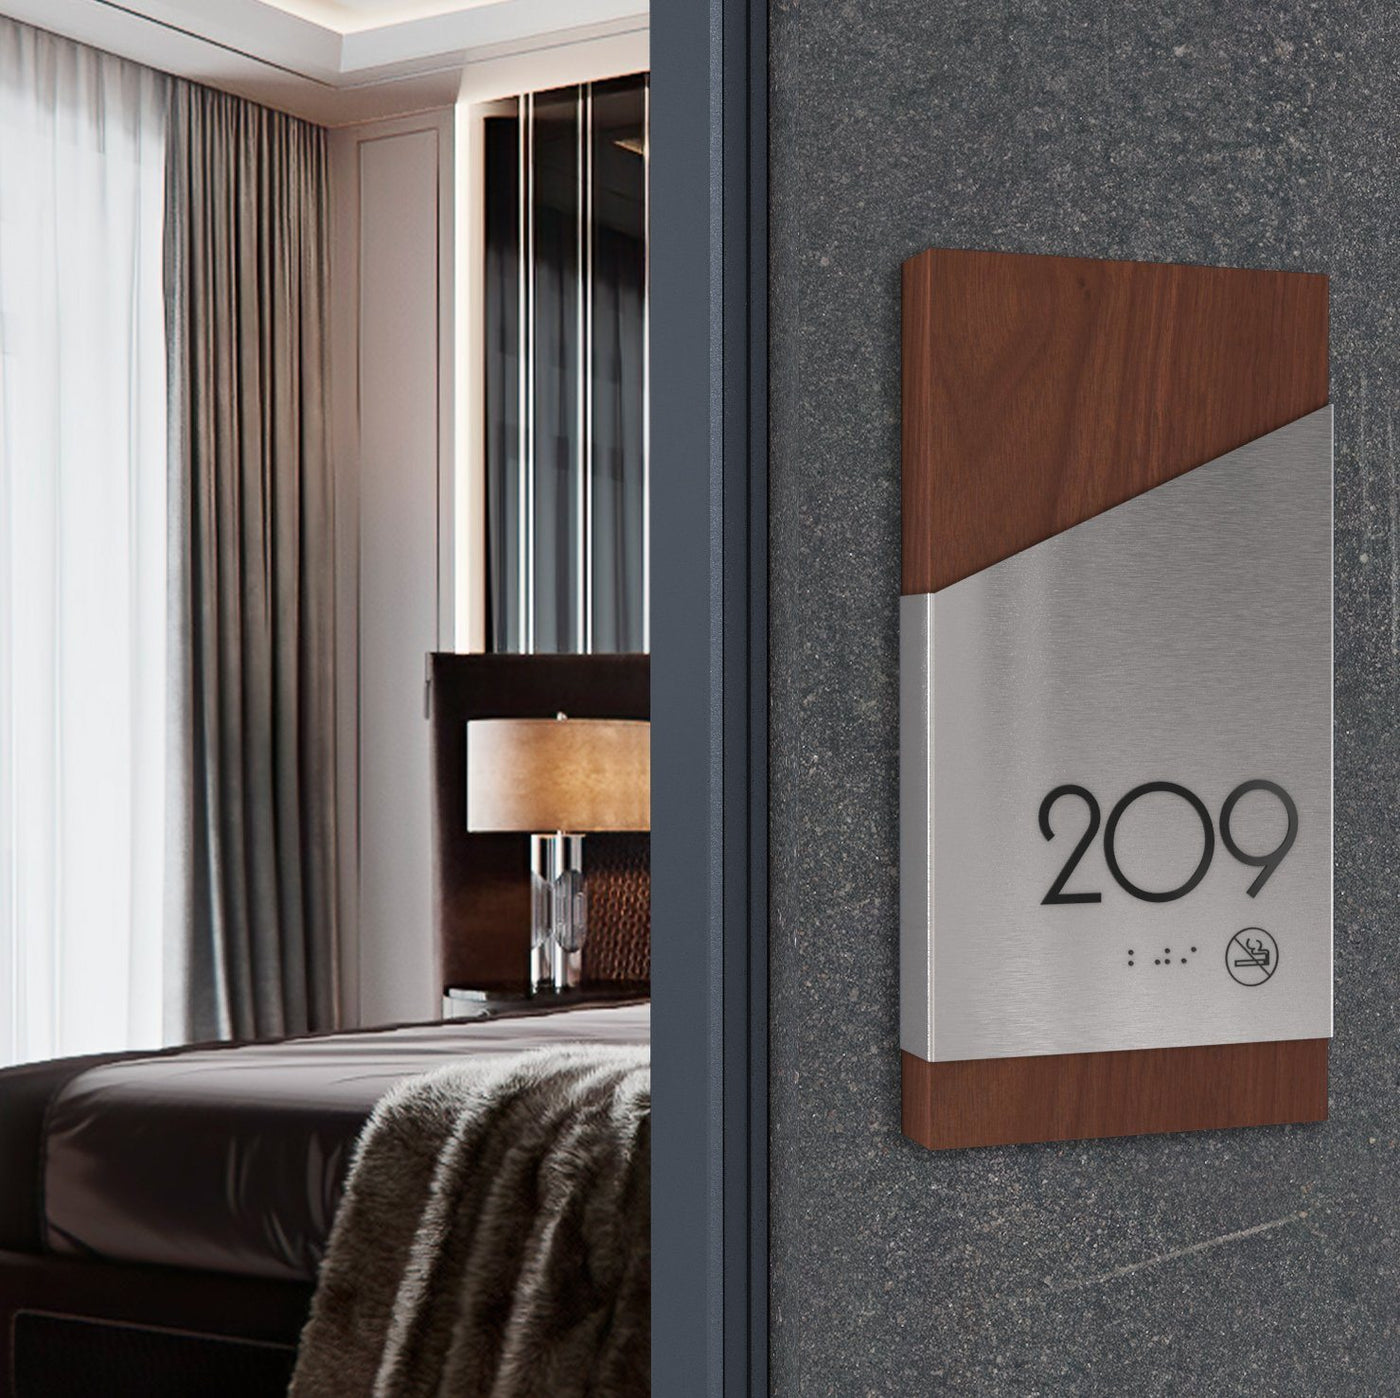 Hotel Room Number Sign - Stainless steel & Wood